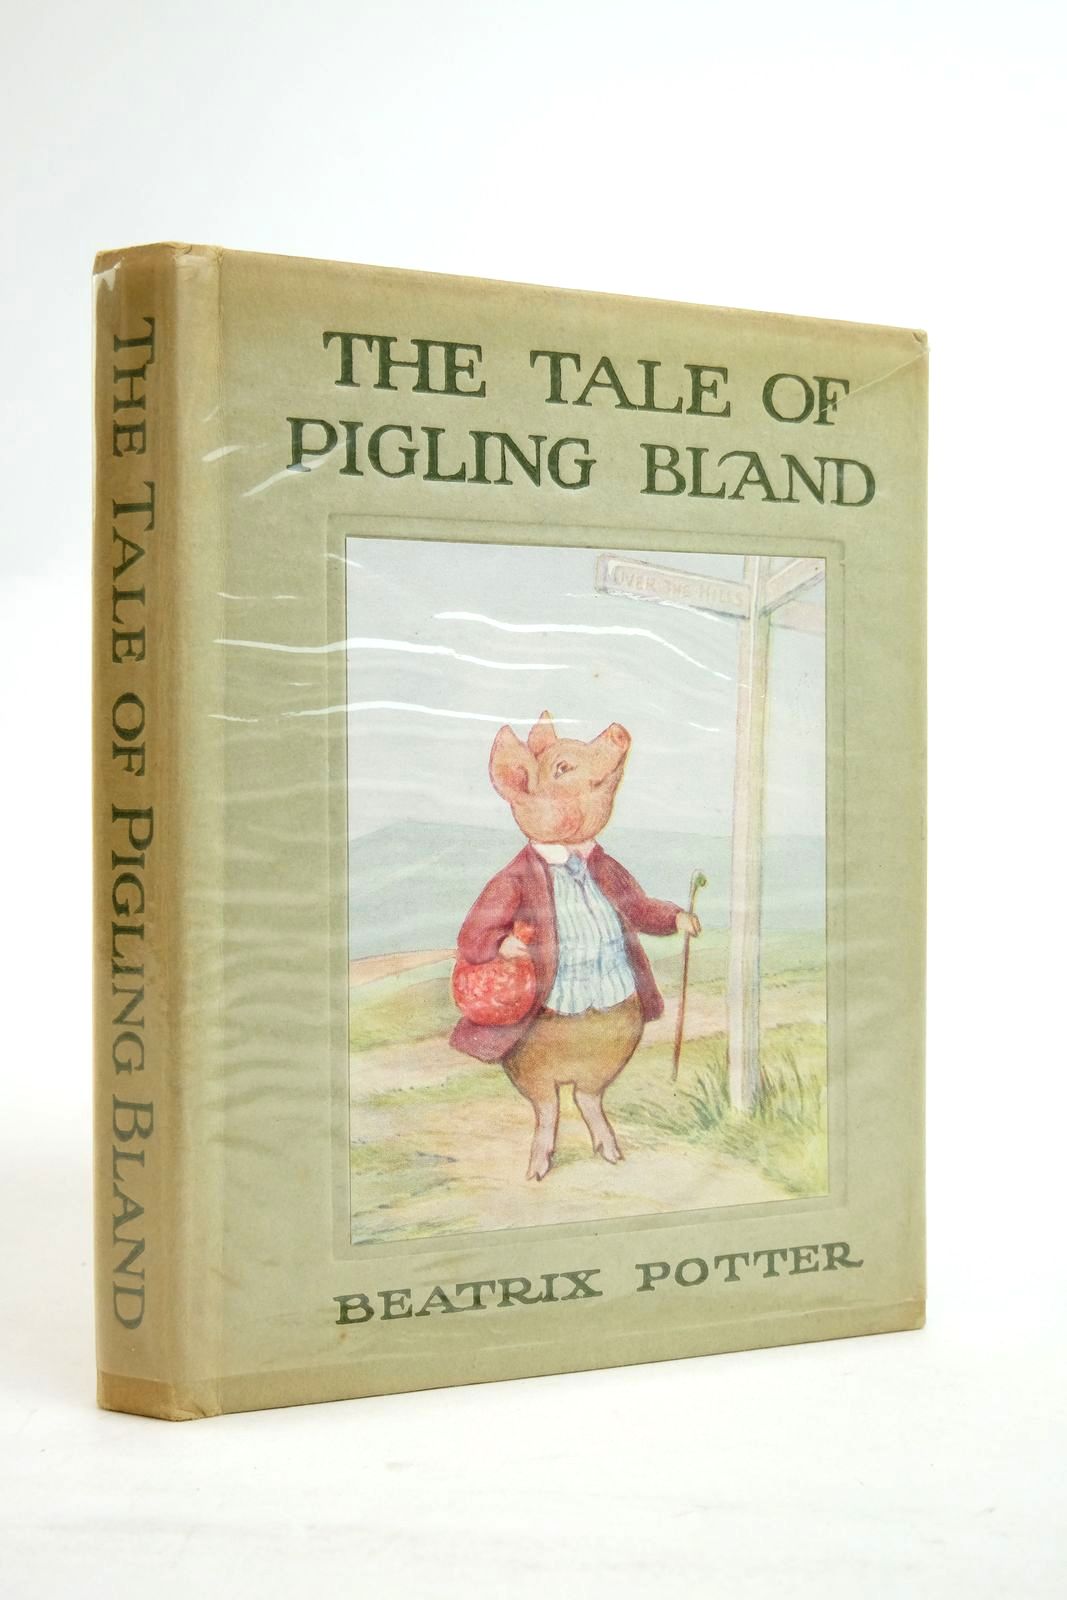 Photo of THE TALE OF PIGLING BLAND written by Potter, Beatrix illustrated by Potter, Beatrix published by Frederick Warne & Co Ltd. (STOCK CODE: 2136424)  for sale by Stella & Rose's Books